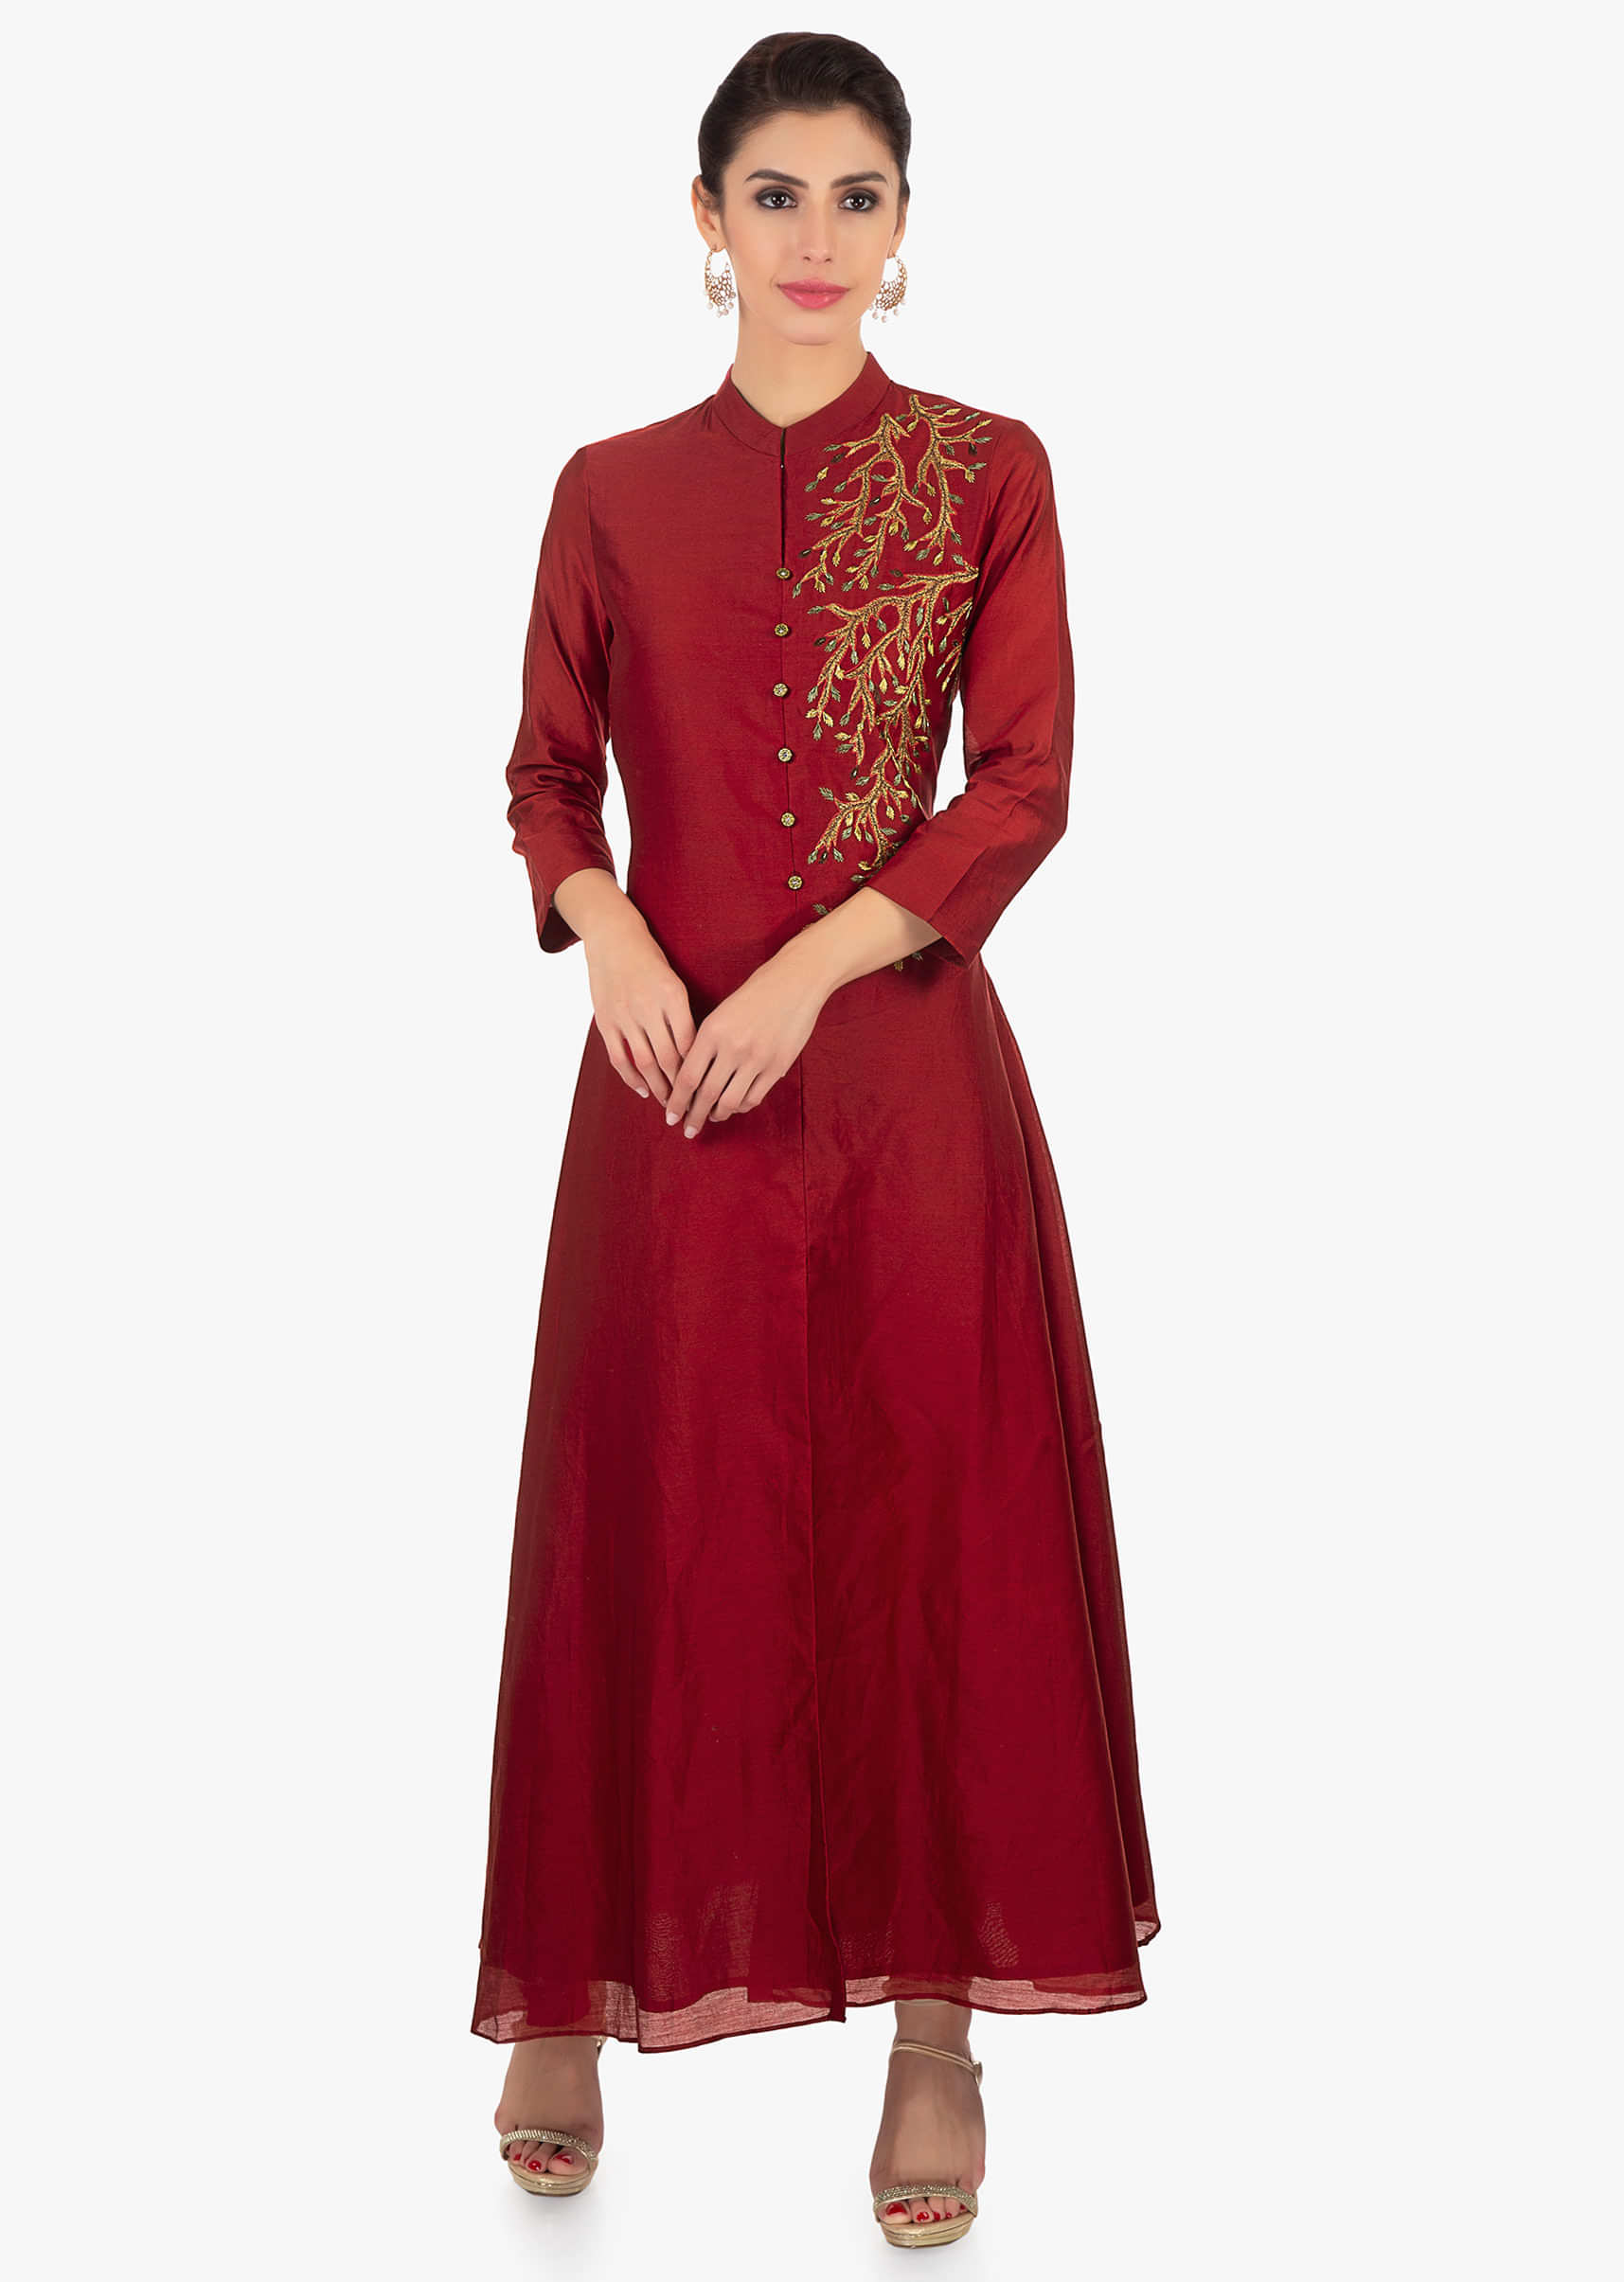 Maroon cotton long tunic dress with front slit